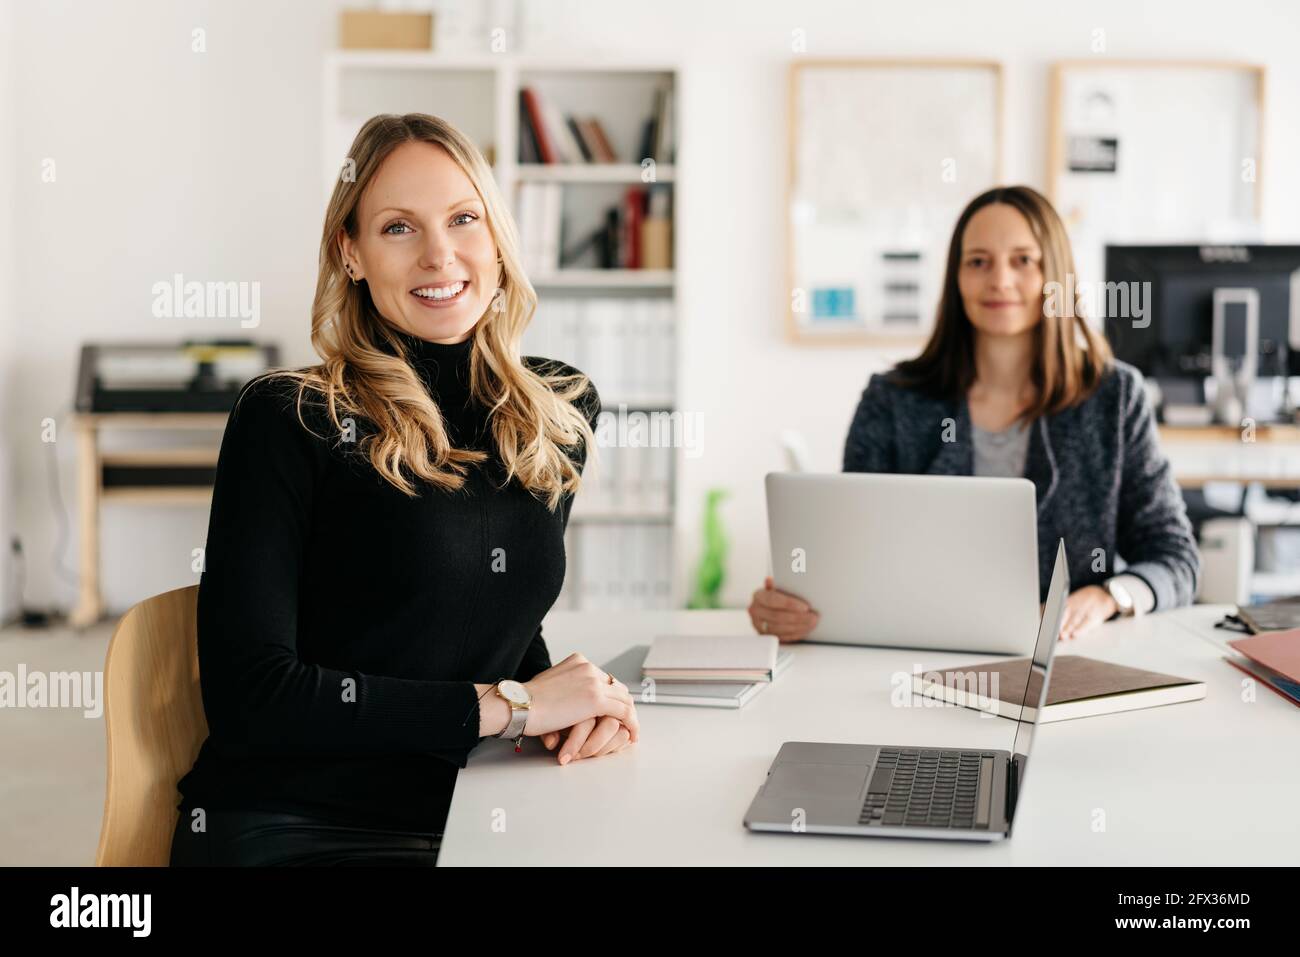 Smiling friendly sincere businesswoman turning to look at the camera as she sits at an office table with a colleague working in the background in a hi Stock Photo